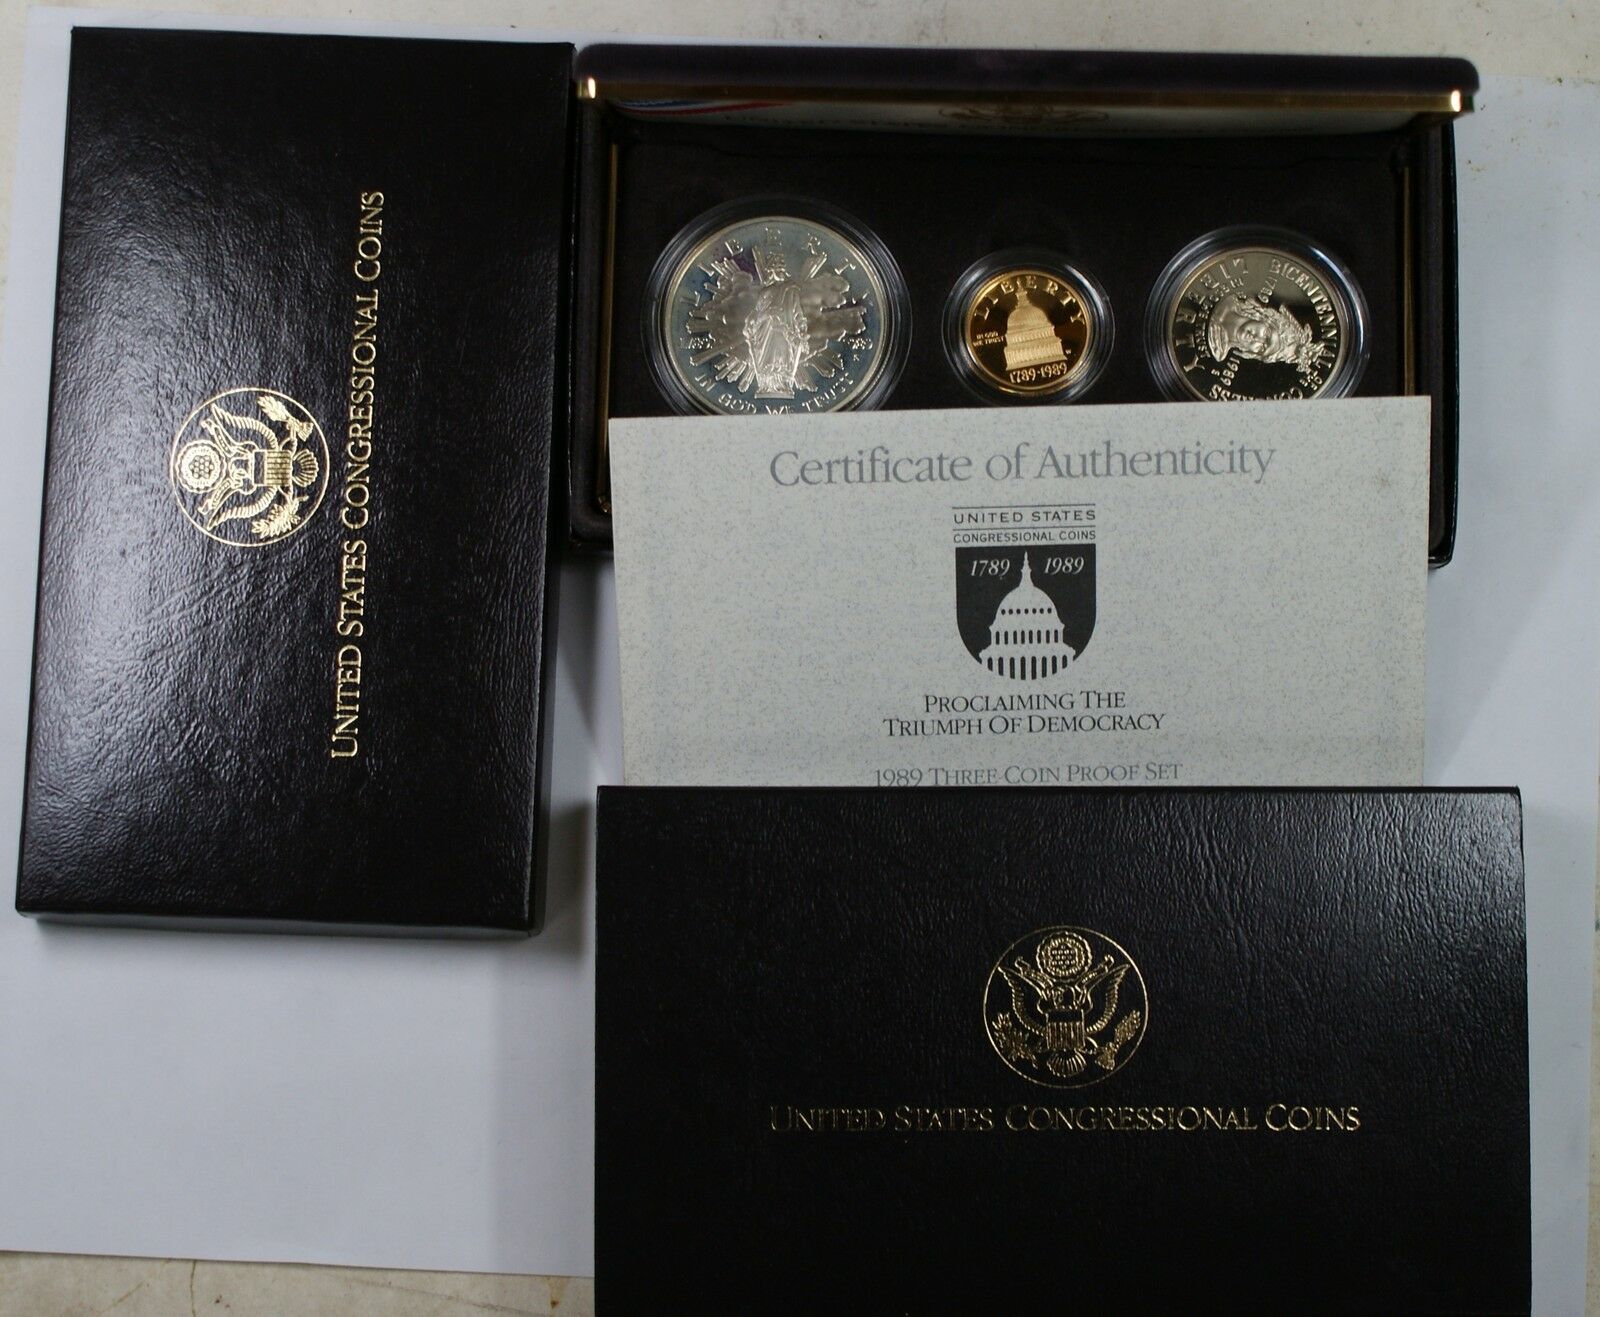 UNITED STATES CONGRESSIONAL COINS